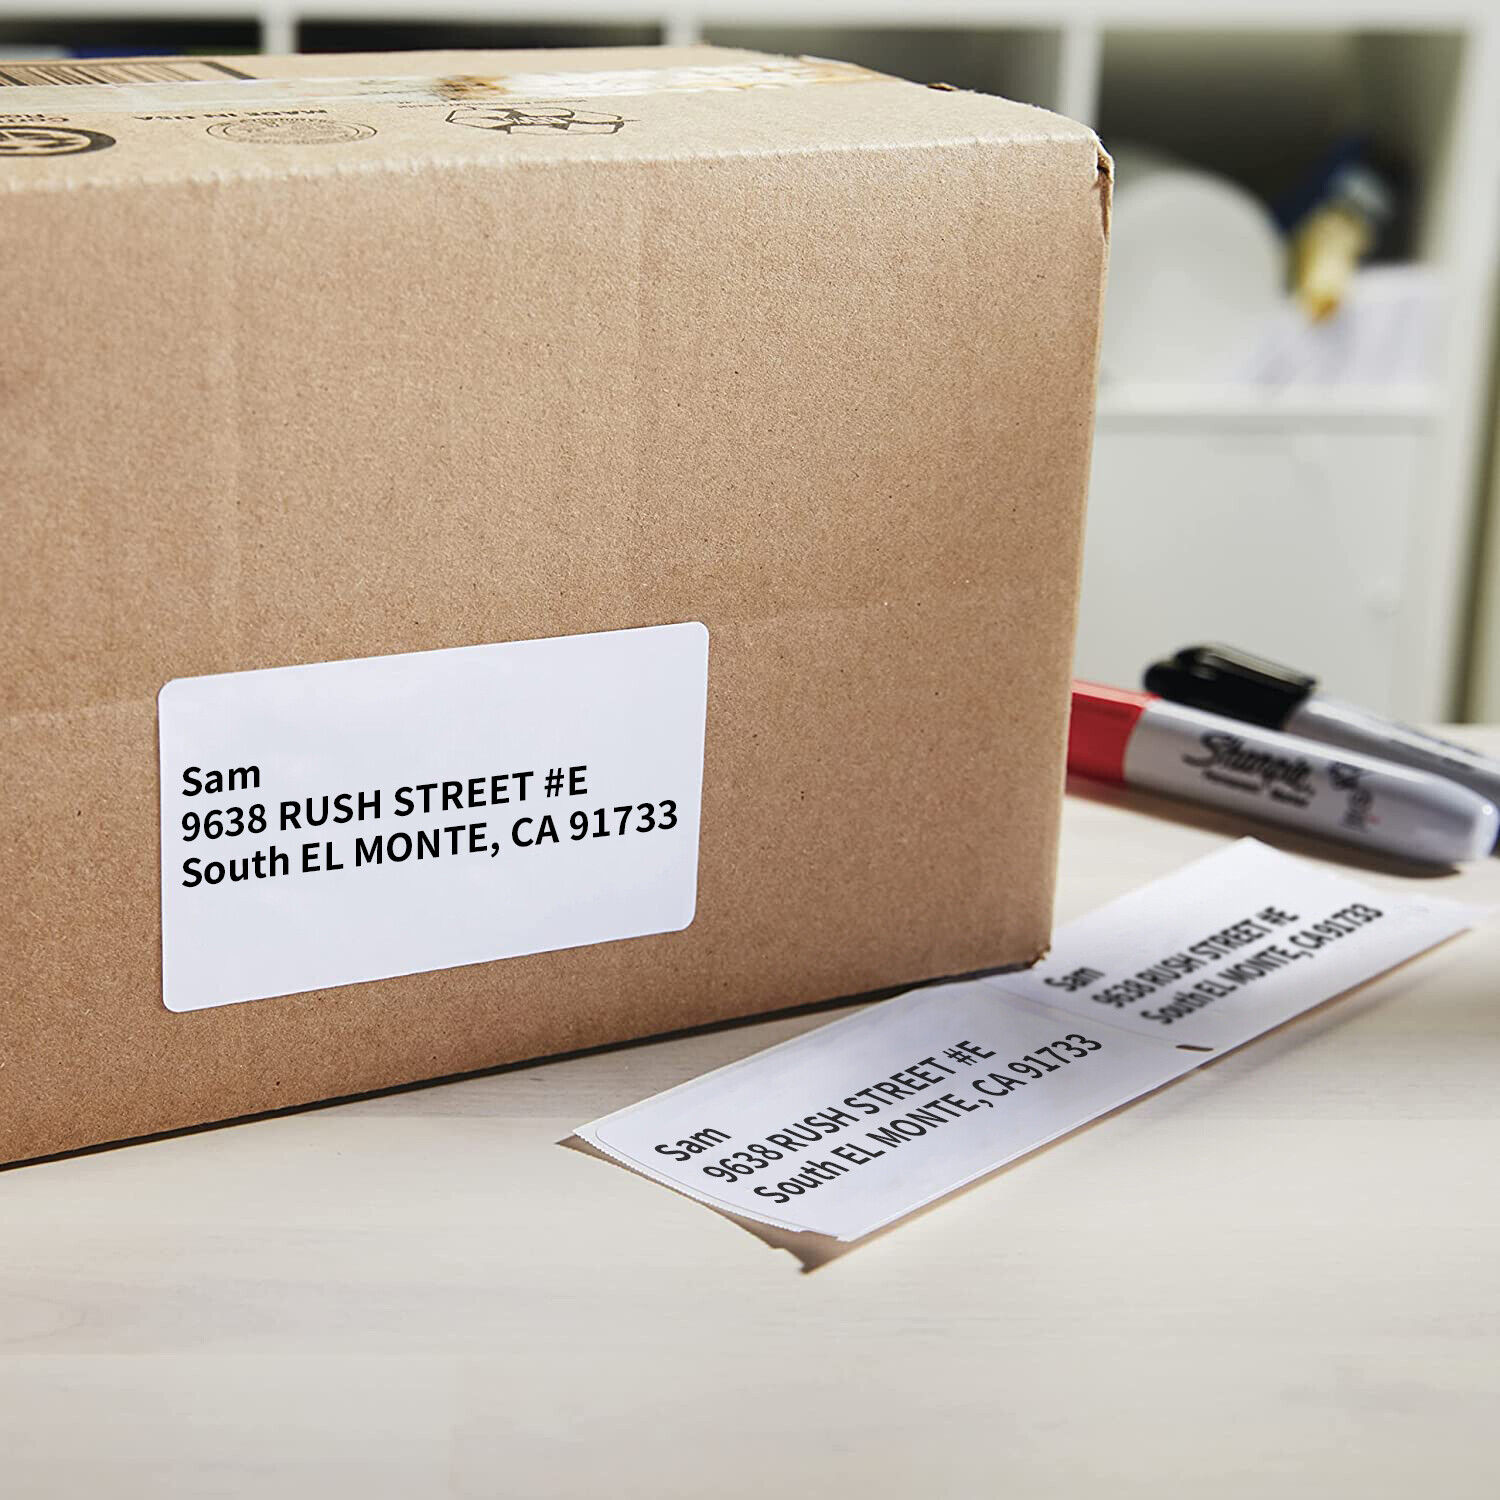 How To Print A Return Label Without A Printer